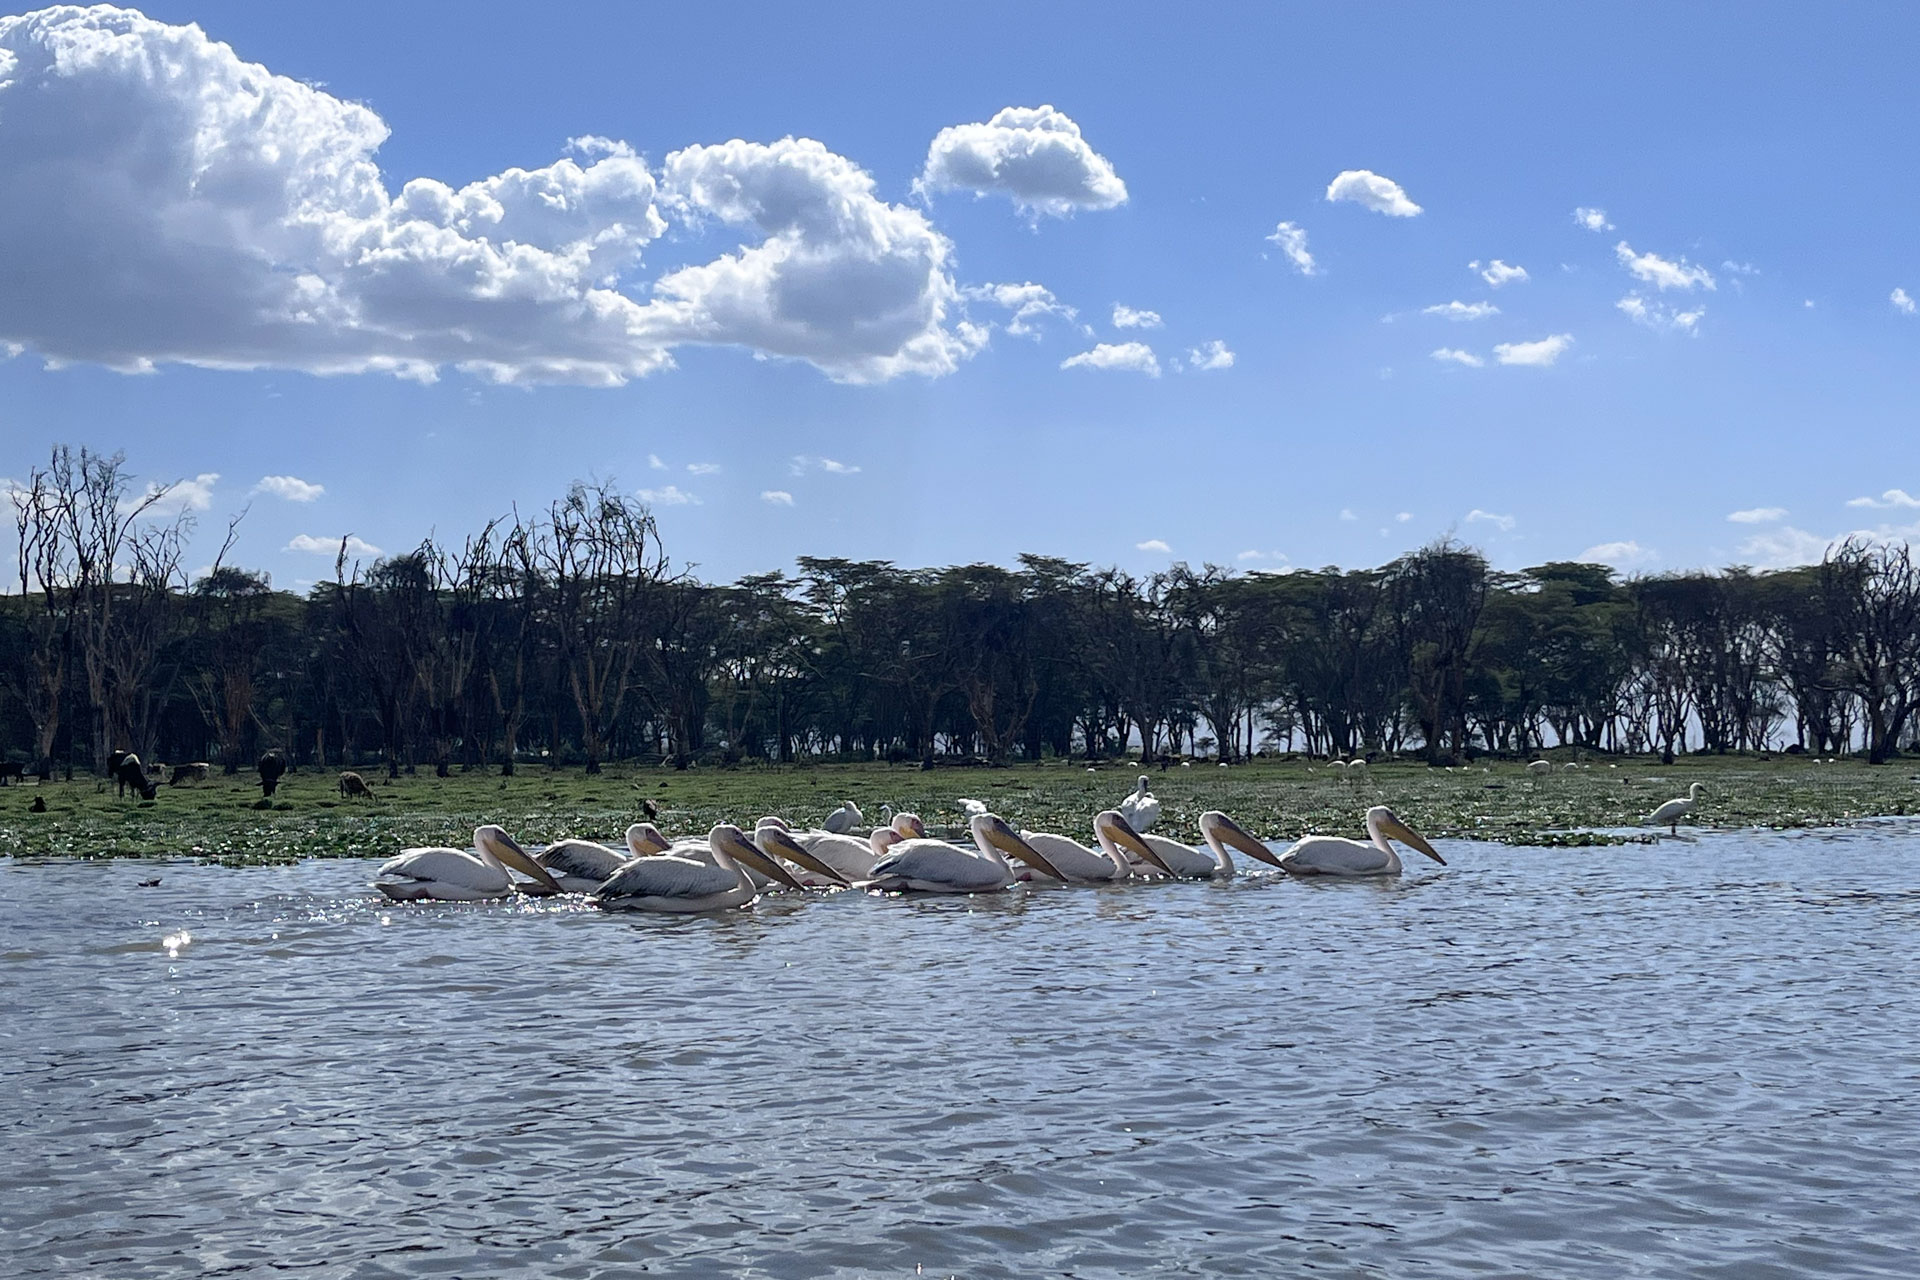 The bird life is abundant, including these great white pelicans